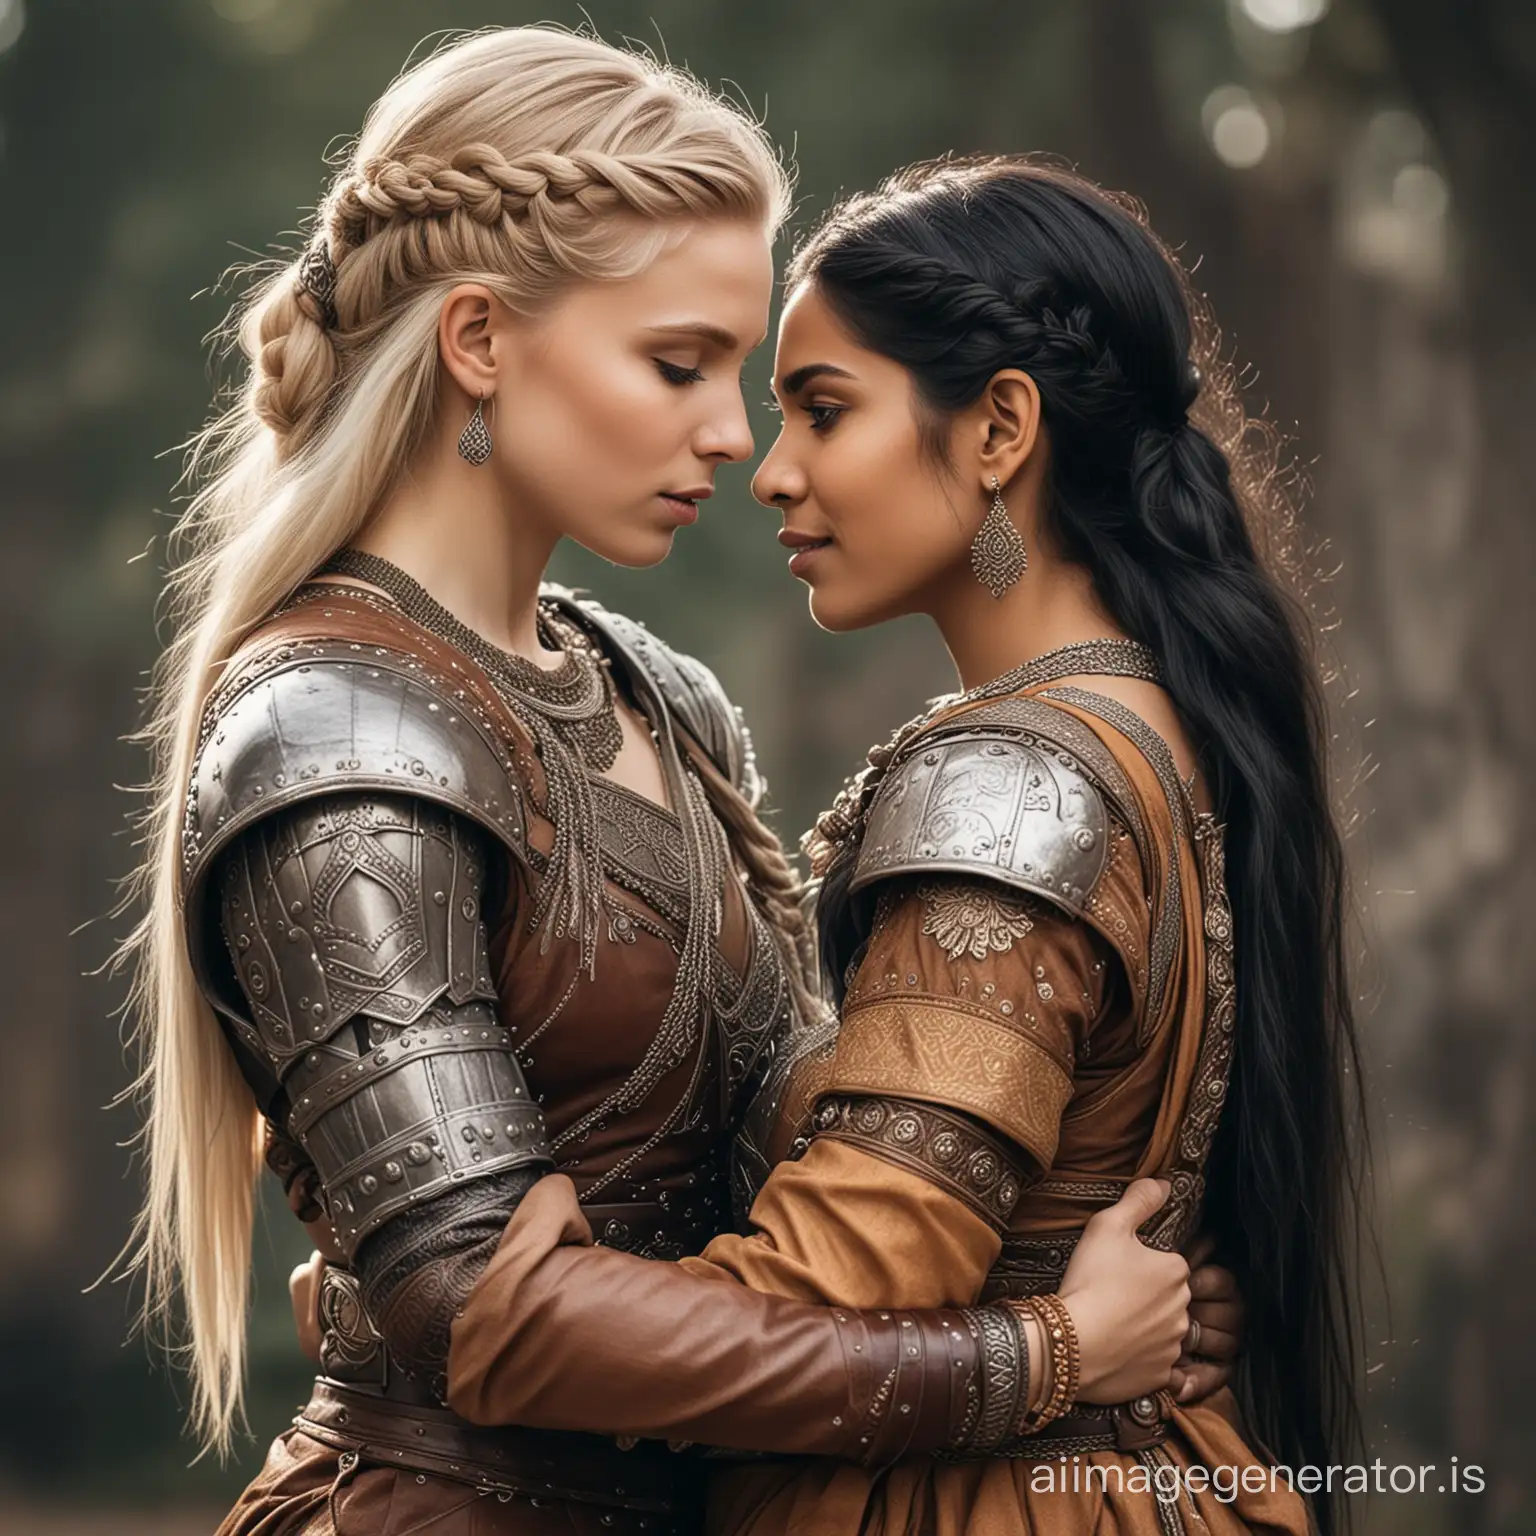 Interracial-Love-Indian-Princess-Embraces-Nordic-Warrior-in-Leather-Armor